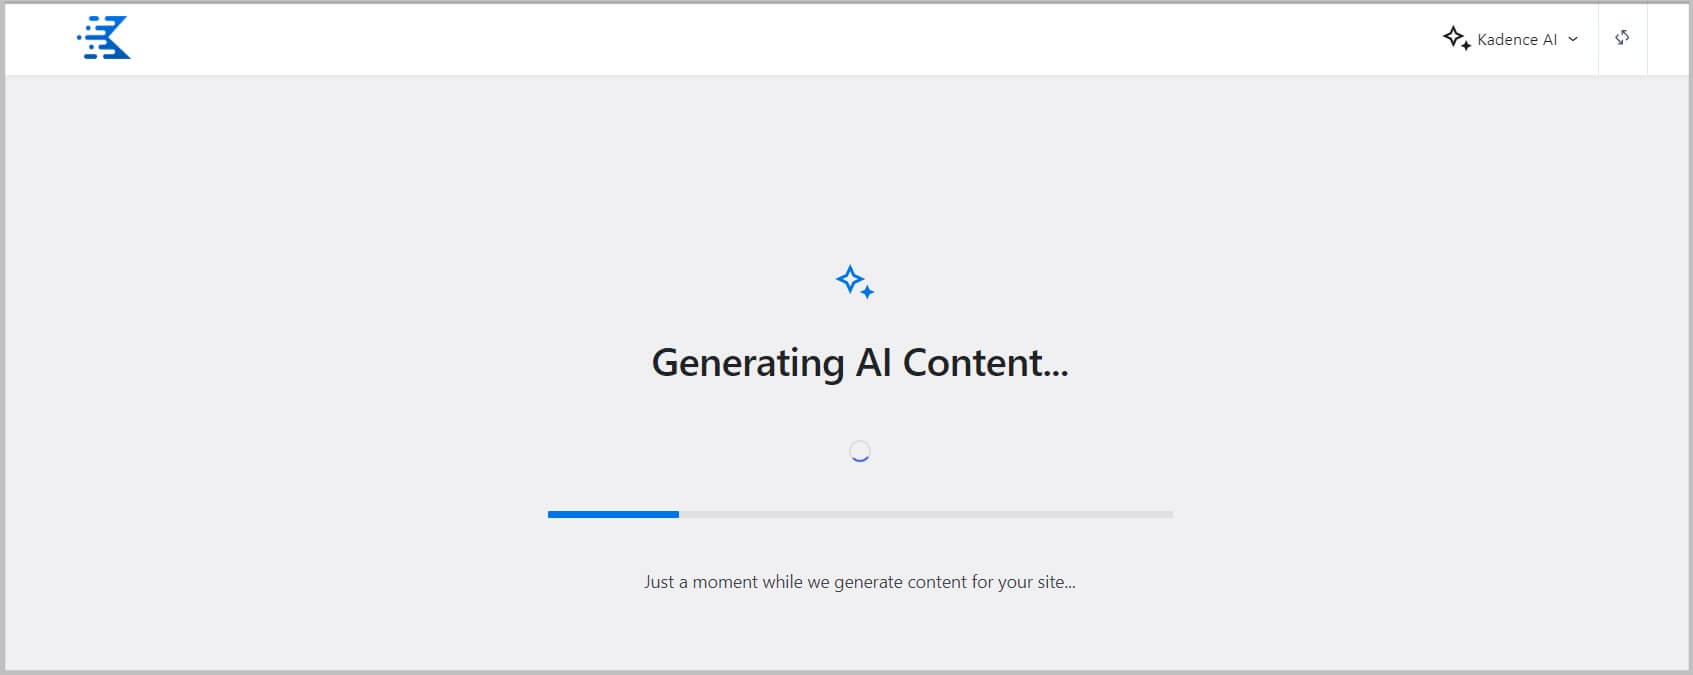 AI content generation in Kadence Starter Templates